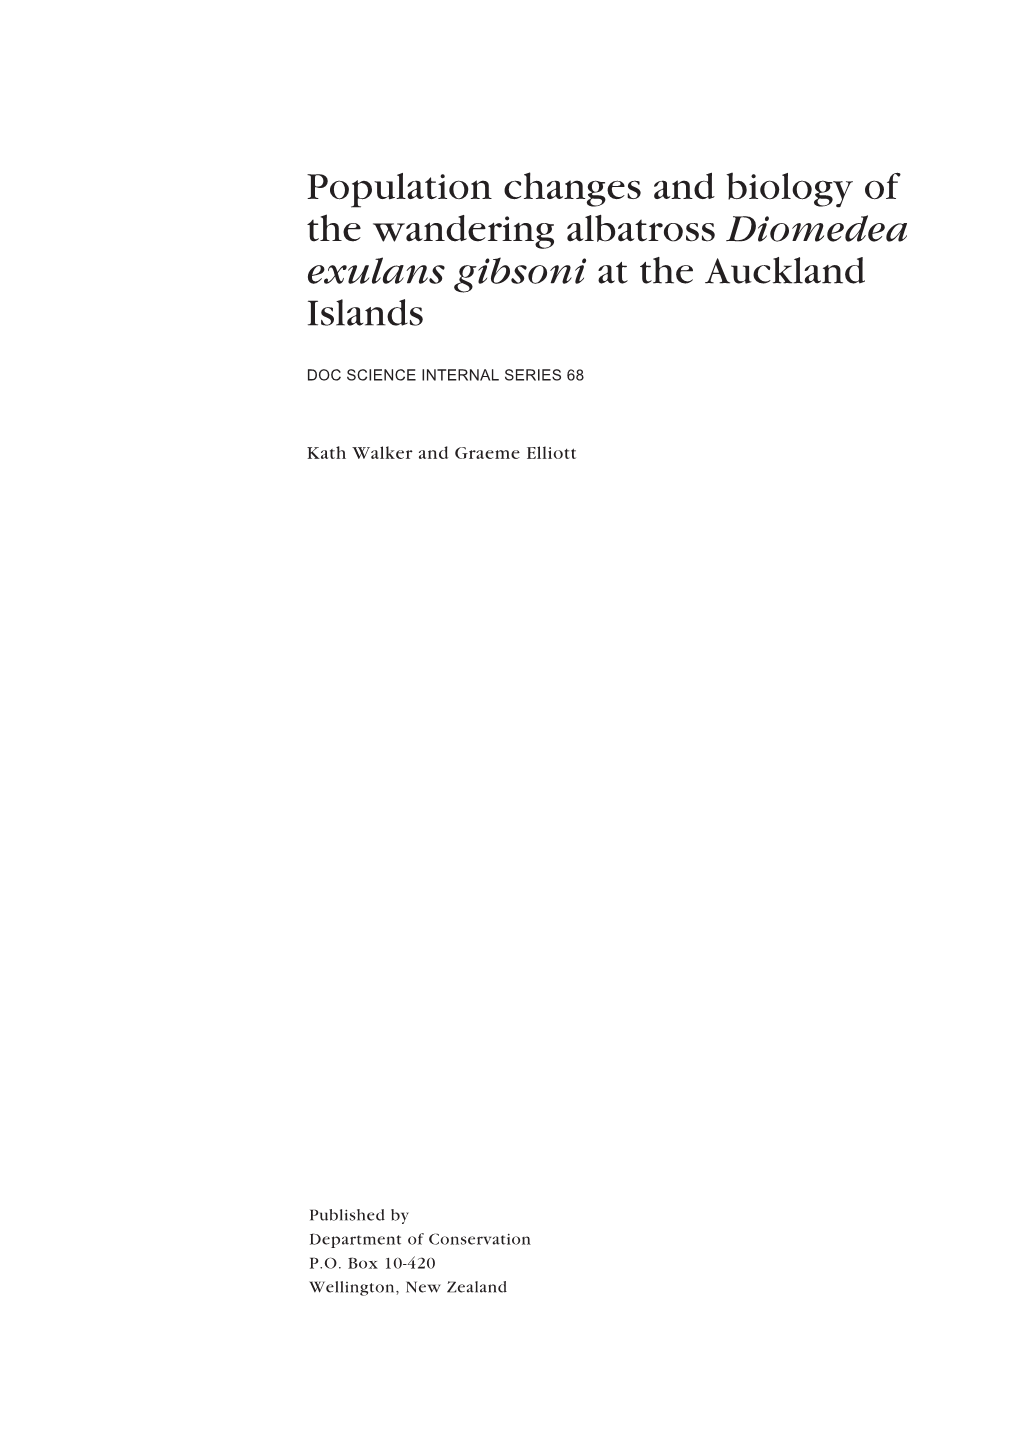 Population Changes and Biology of the Wandering Albatross Diomedea Exulans Gibsoni at the Auckland Islands